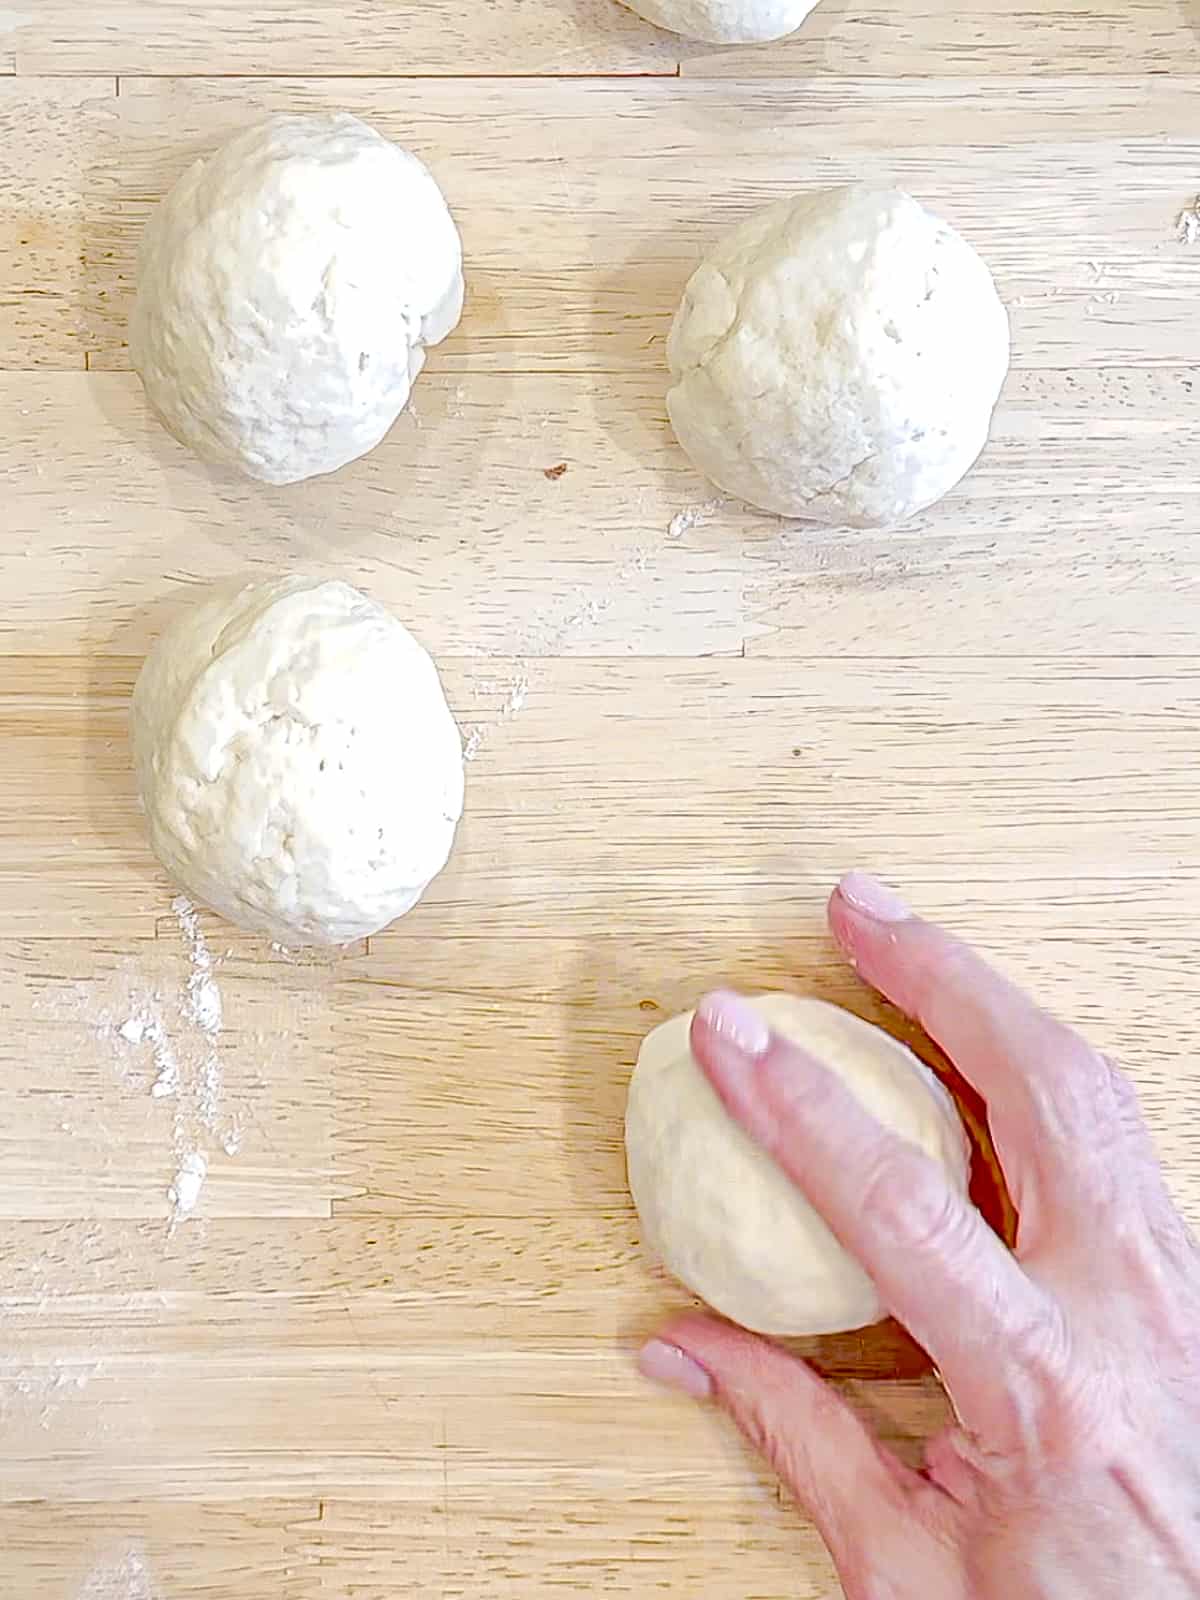 Rolling 2 Ingredient bagel dough into a ball.